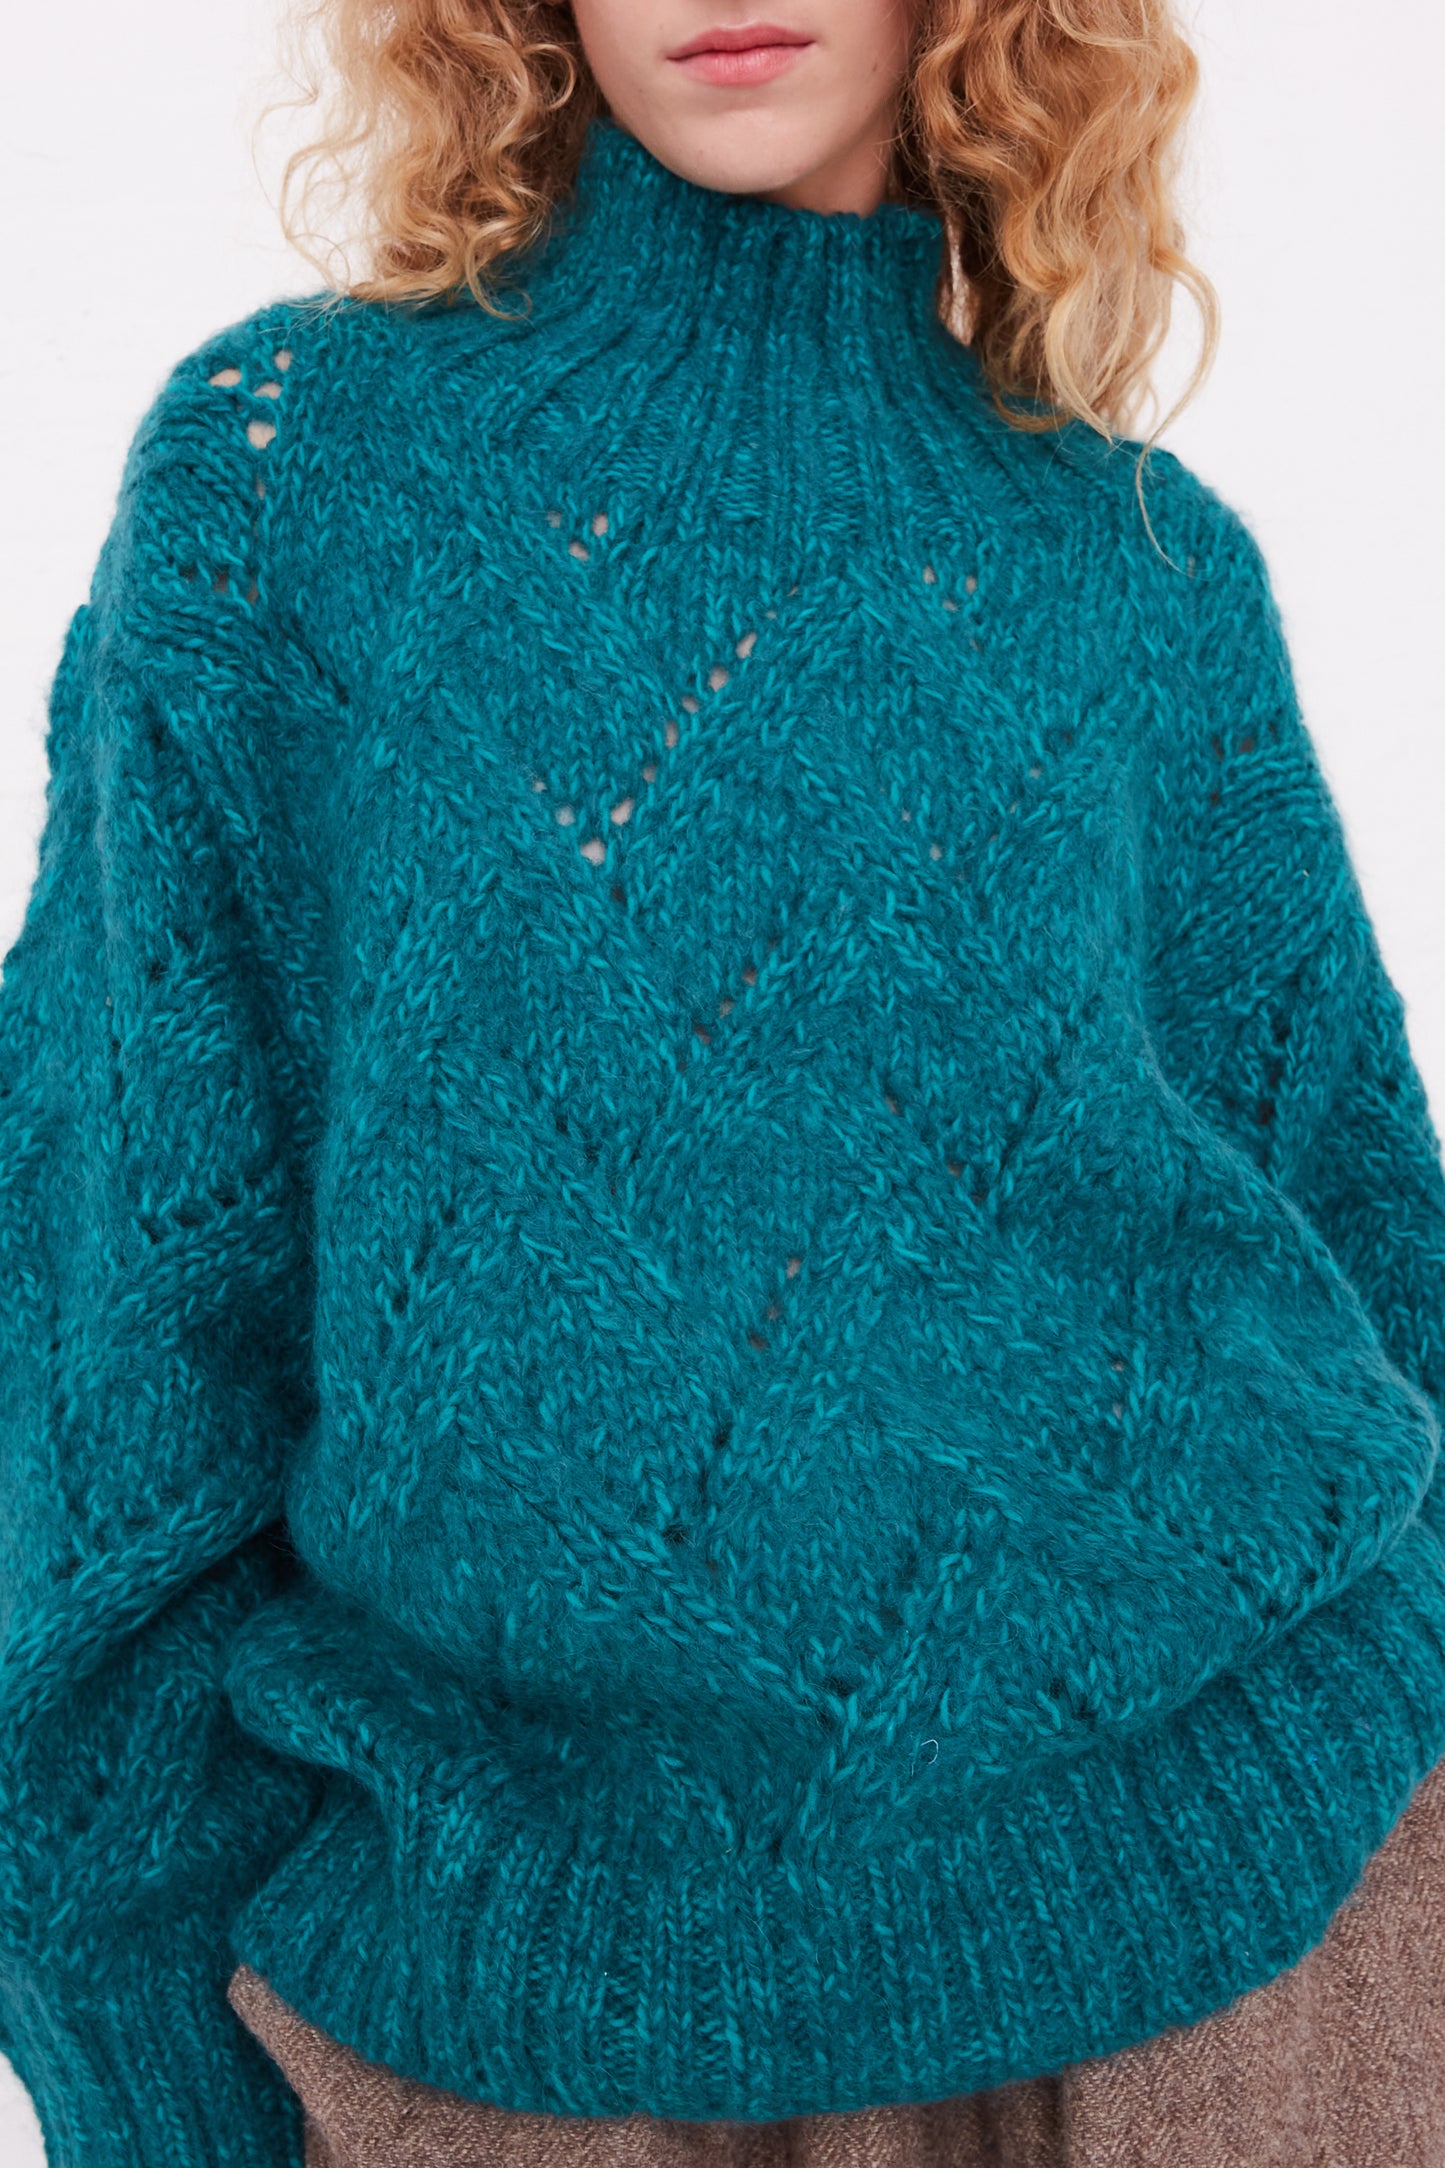 A woman wearing an oversized Hand-Knit Turtleneck in Green Teal sweater by Ichi Antiquités.